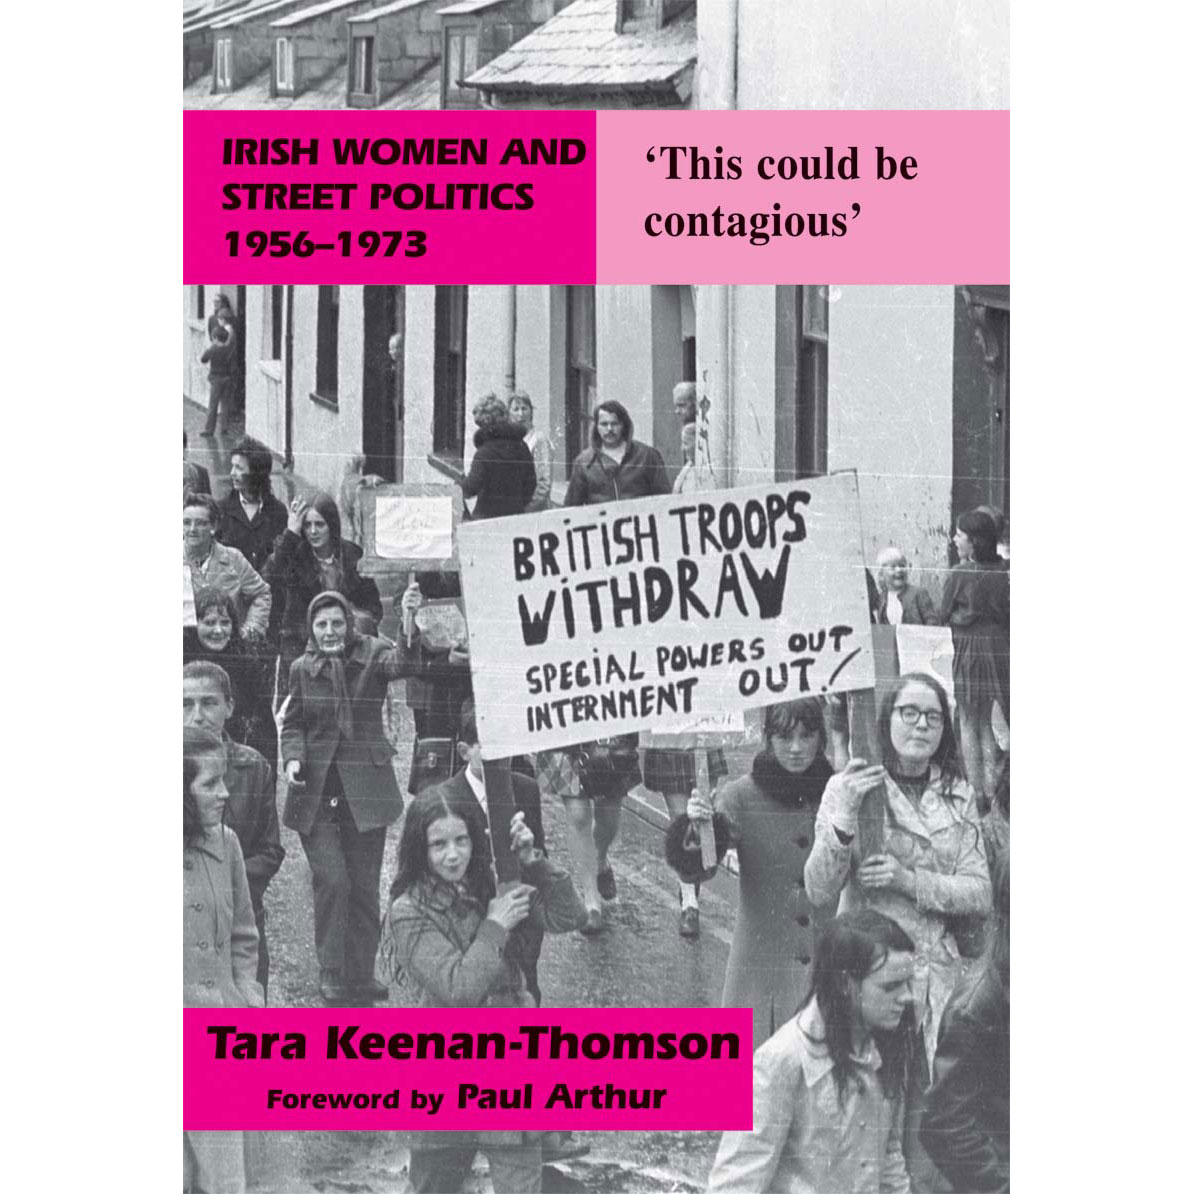 Irish Women and Street Politics Book, 1956-1973: 'This Could be Contagious' Hardcover – 31 Mar 2010